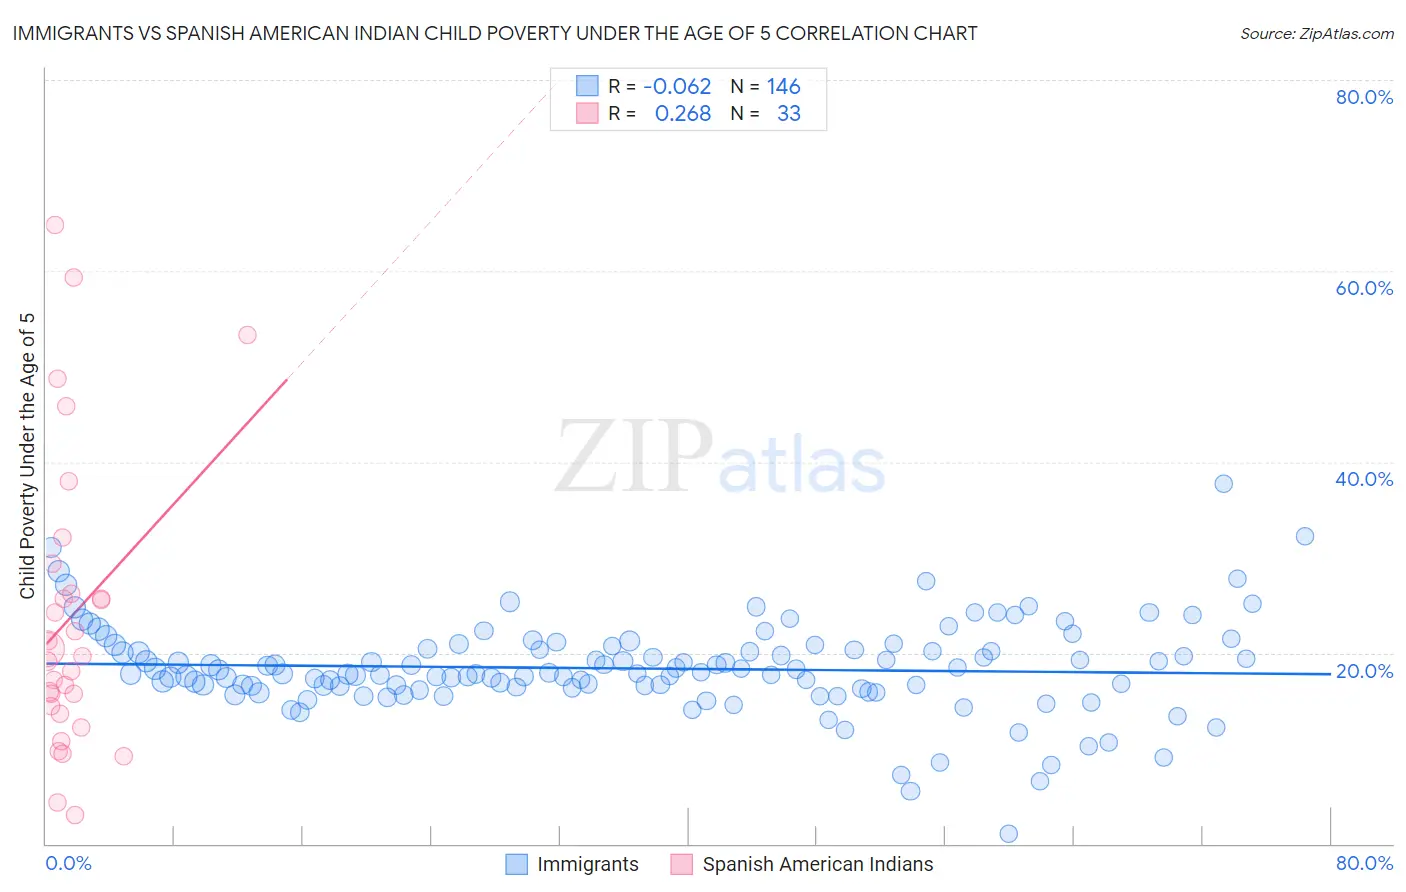 Immigrants vs Spanish American Indian Child Poverty Under the Age of 5